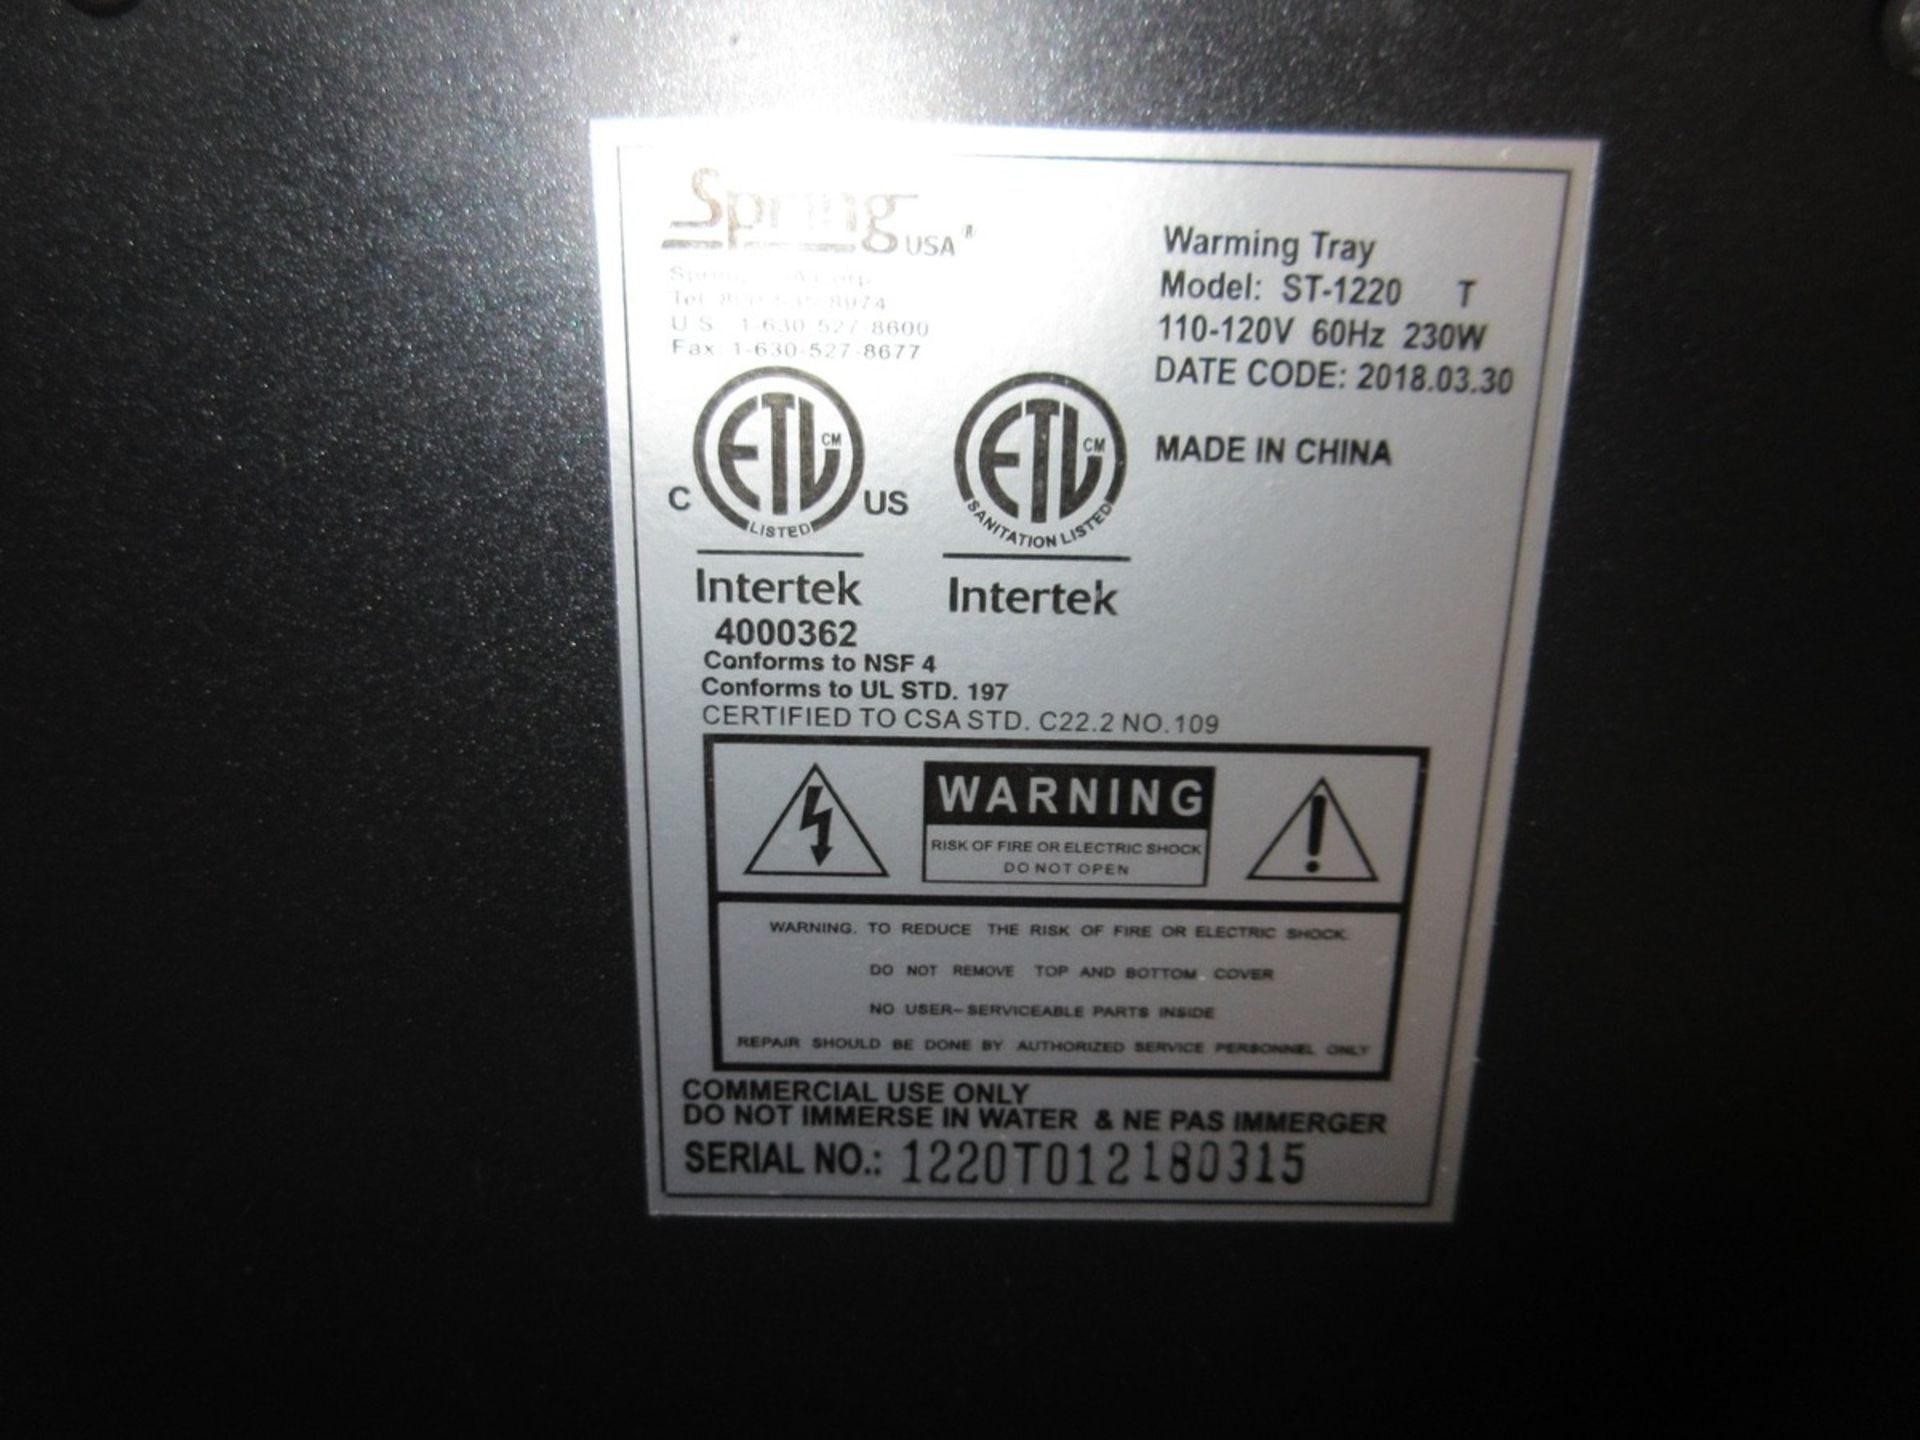 (1) Spring USA Model ST-1220 Warming Tray (Not Used) - Image 2 of 2